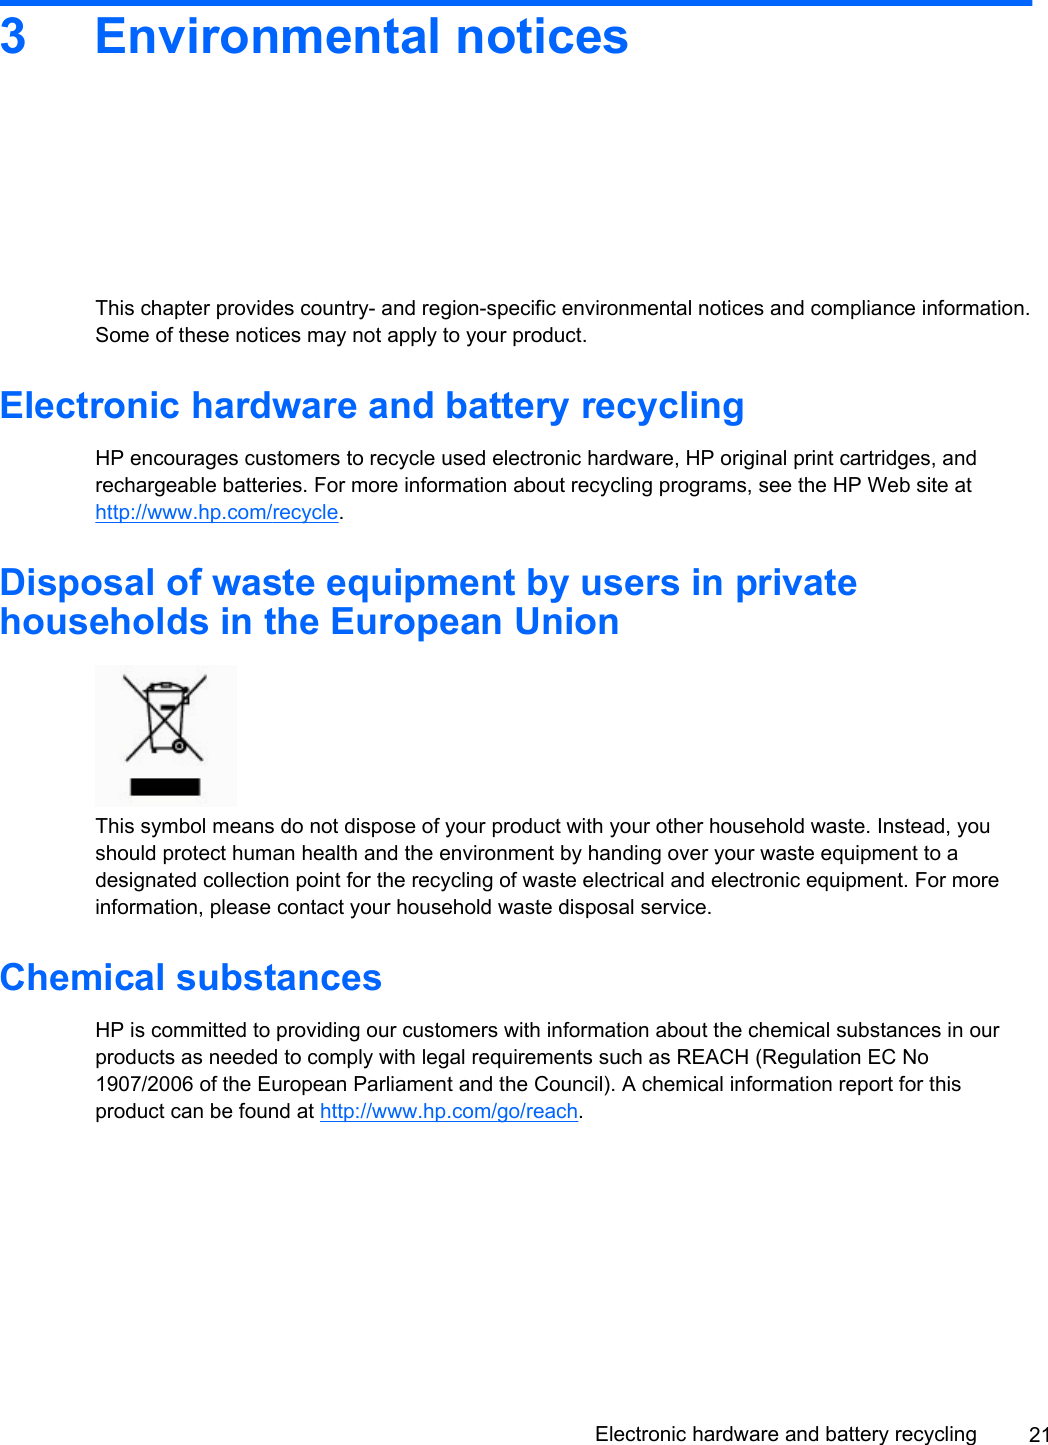 3 Environmental noticesThis chapter provides country- and region-specific environmental notices and compliance information.Some of these notices may not apply to your product.Electronic hardware and battery recyclingHP encourages customers to recycle used electronic hardware, HP original print cartridges, andrechargeable batteries. For more information about recycling programs, see the HP Web site athttp://www.hp.com/recycle.Disposal of waste equipment by users in privatehouseholds in the European UnionThis symbol means do not dispose of your product with your other household waste. Instead, youshould protect human health and the environment by handing over your waste equipment to adesignated collection point for the recycling of waste electrical and electronic equipment. For moreinformation, please contact your household waste disposal service.Chemical substancesHP is committed to providing our customers with information about the chemical substances in ourproducts as needed to comply with legal requirements such as REACH (Regulation EC No1907/2006 of the European Parliament and the Council). A chemical information report for thisproduct can be found at http://www.hp.com/go/reach.Electronic hardware and battery recycling 21